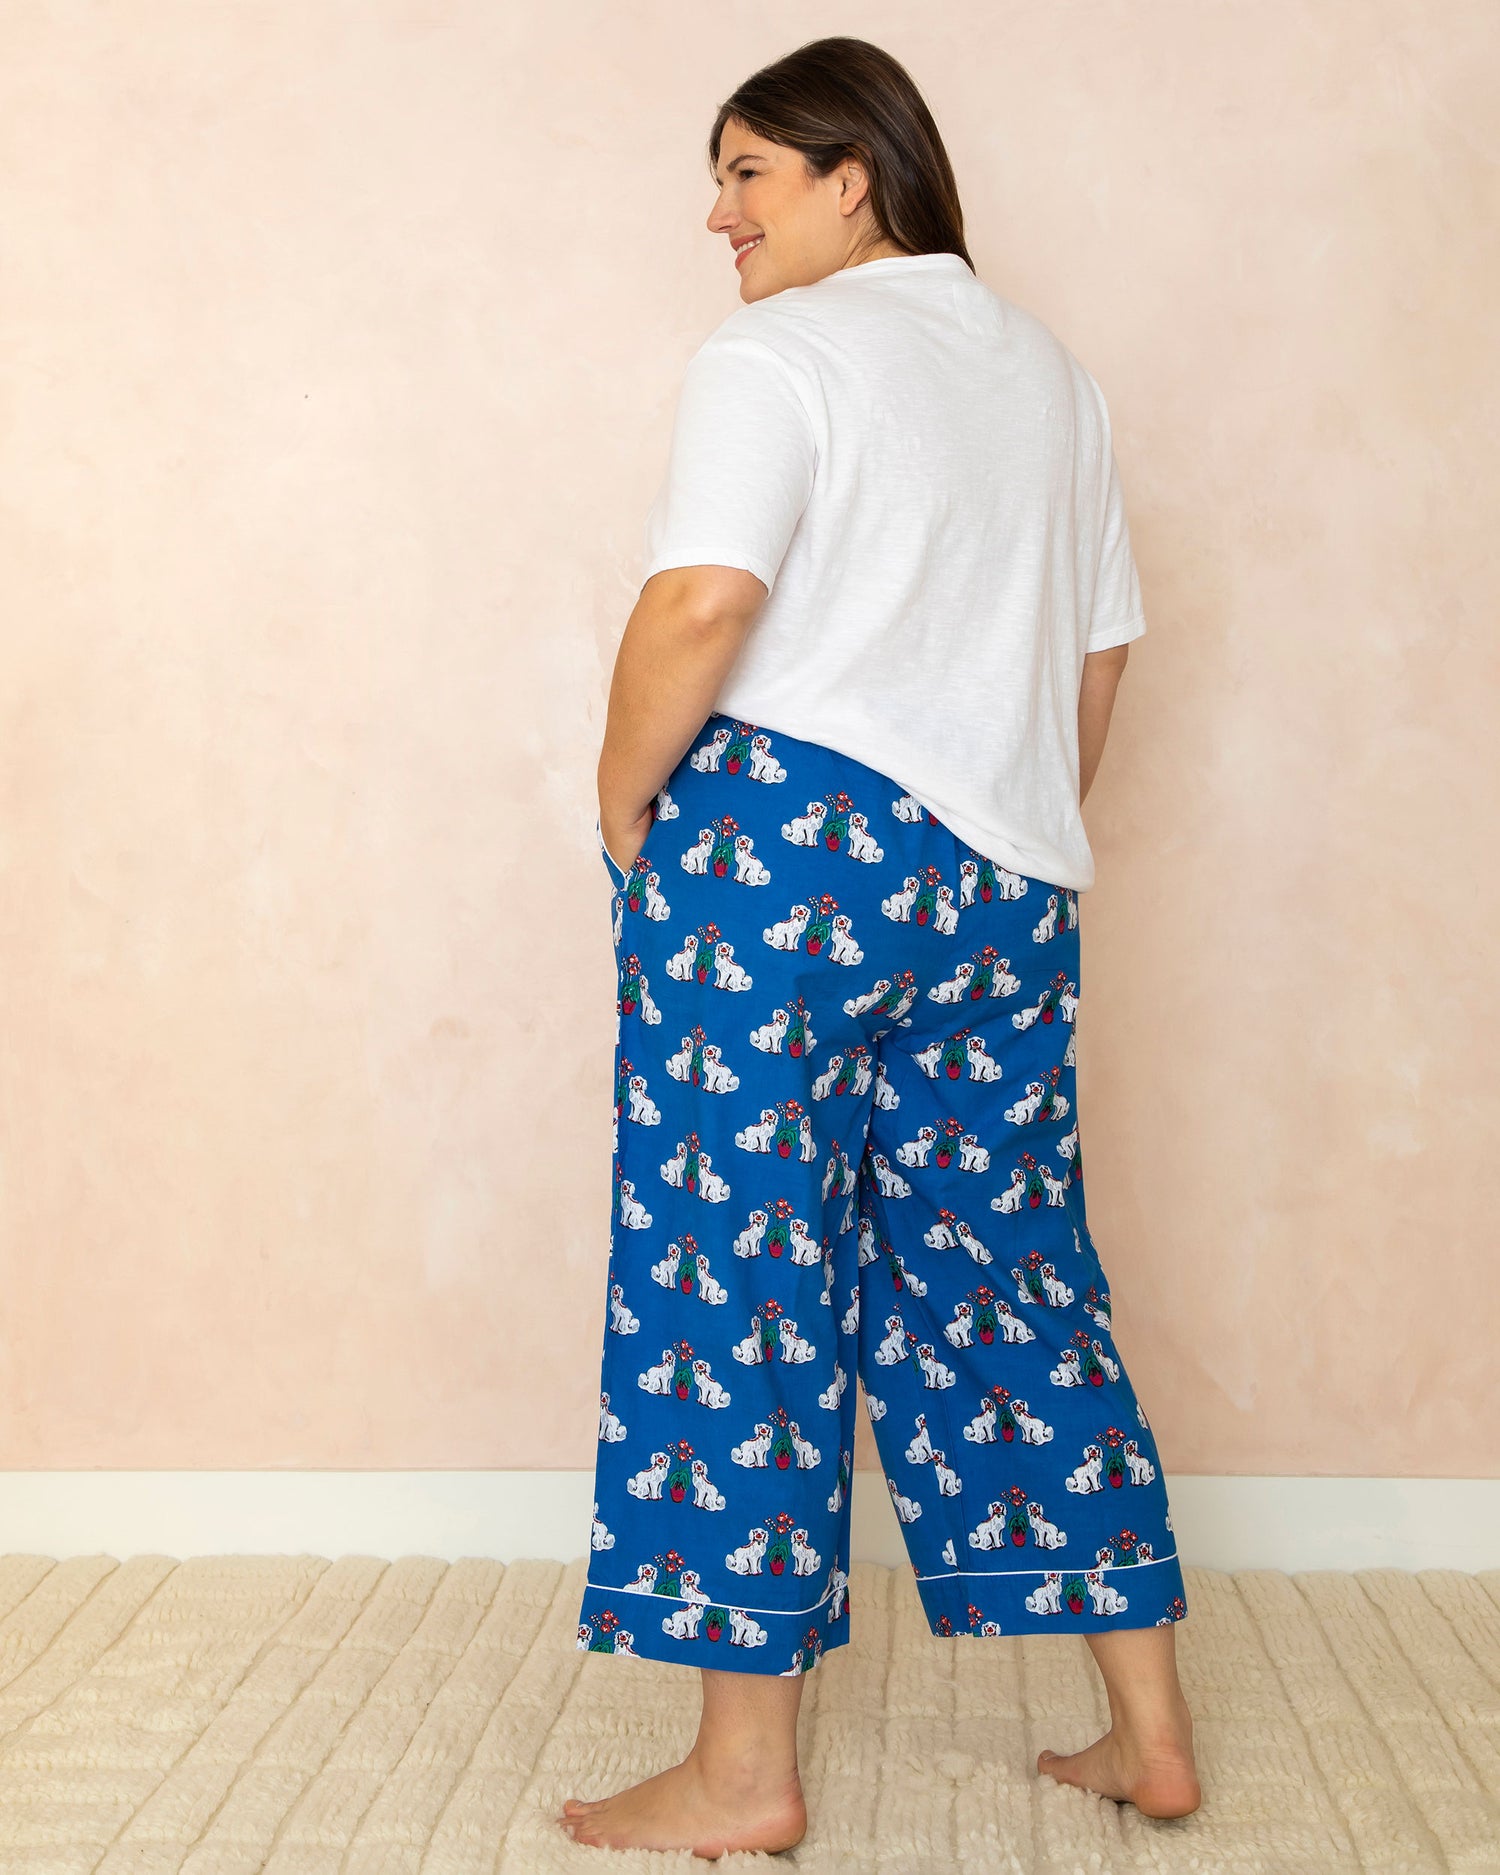 Matching Spaniels - Cropped Pajama Pants - Queen Blue - Printfresh